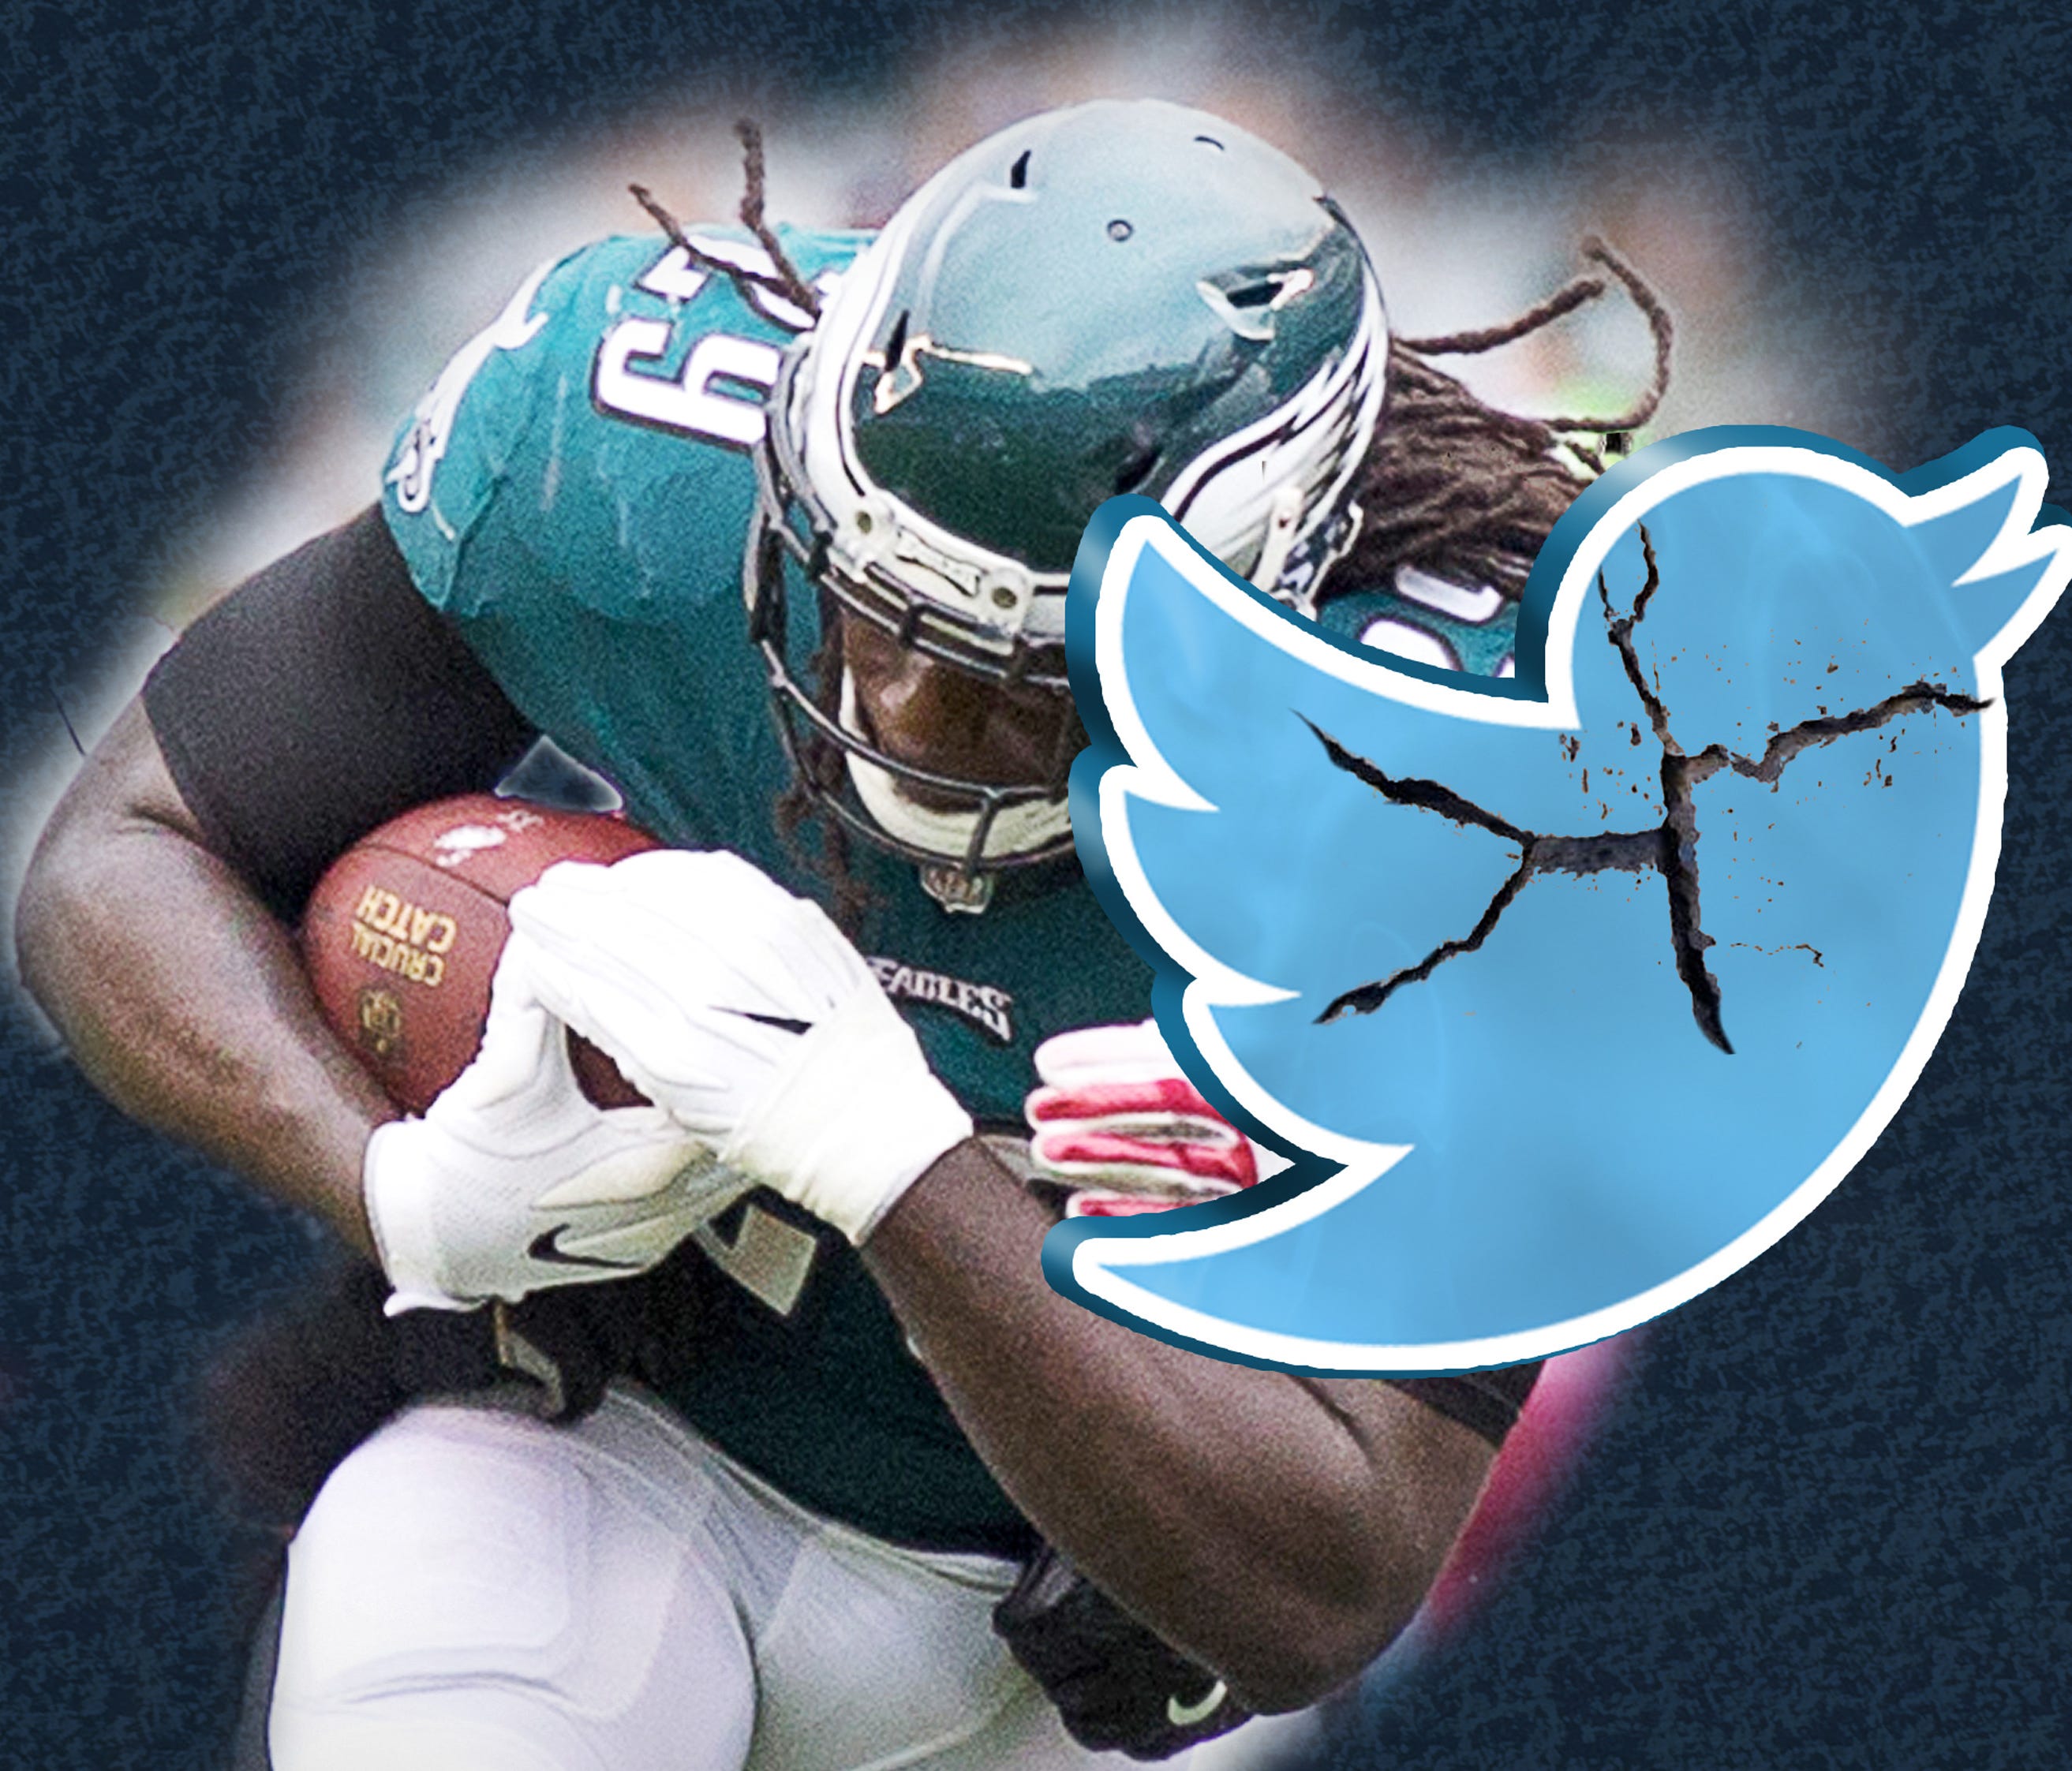 Some NFL players are pushing back on fans through social media rather than sitting idly by.